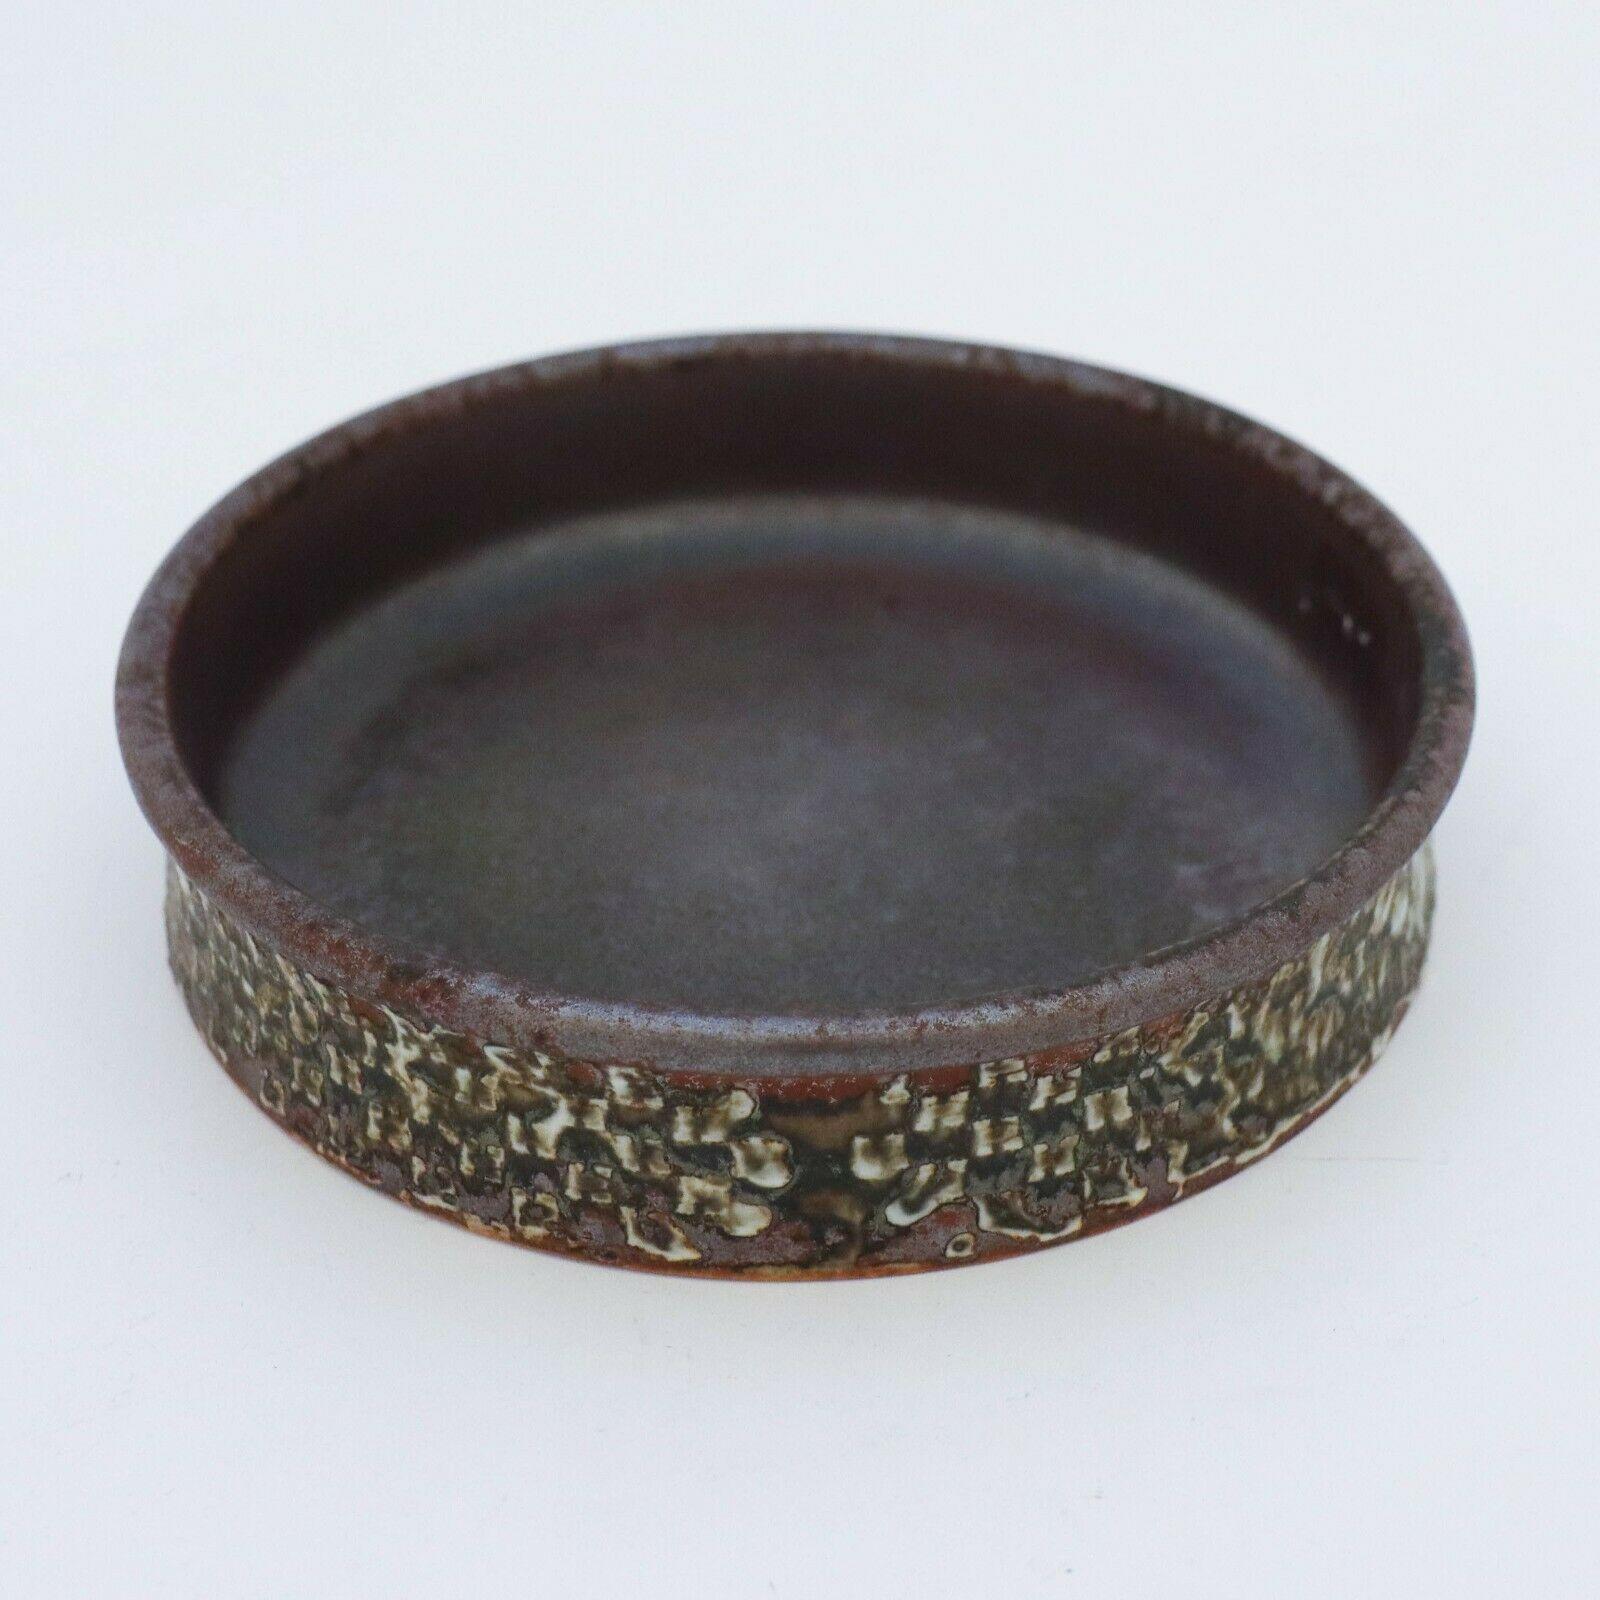 A brown bowl made in stoneware designed by Stig Lindberg at Gustavsbergs Studio. It is 14.5 cm in diameter and 3.2 cm high.